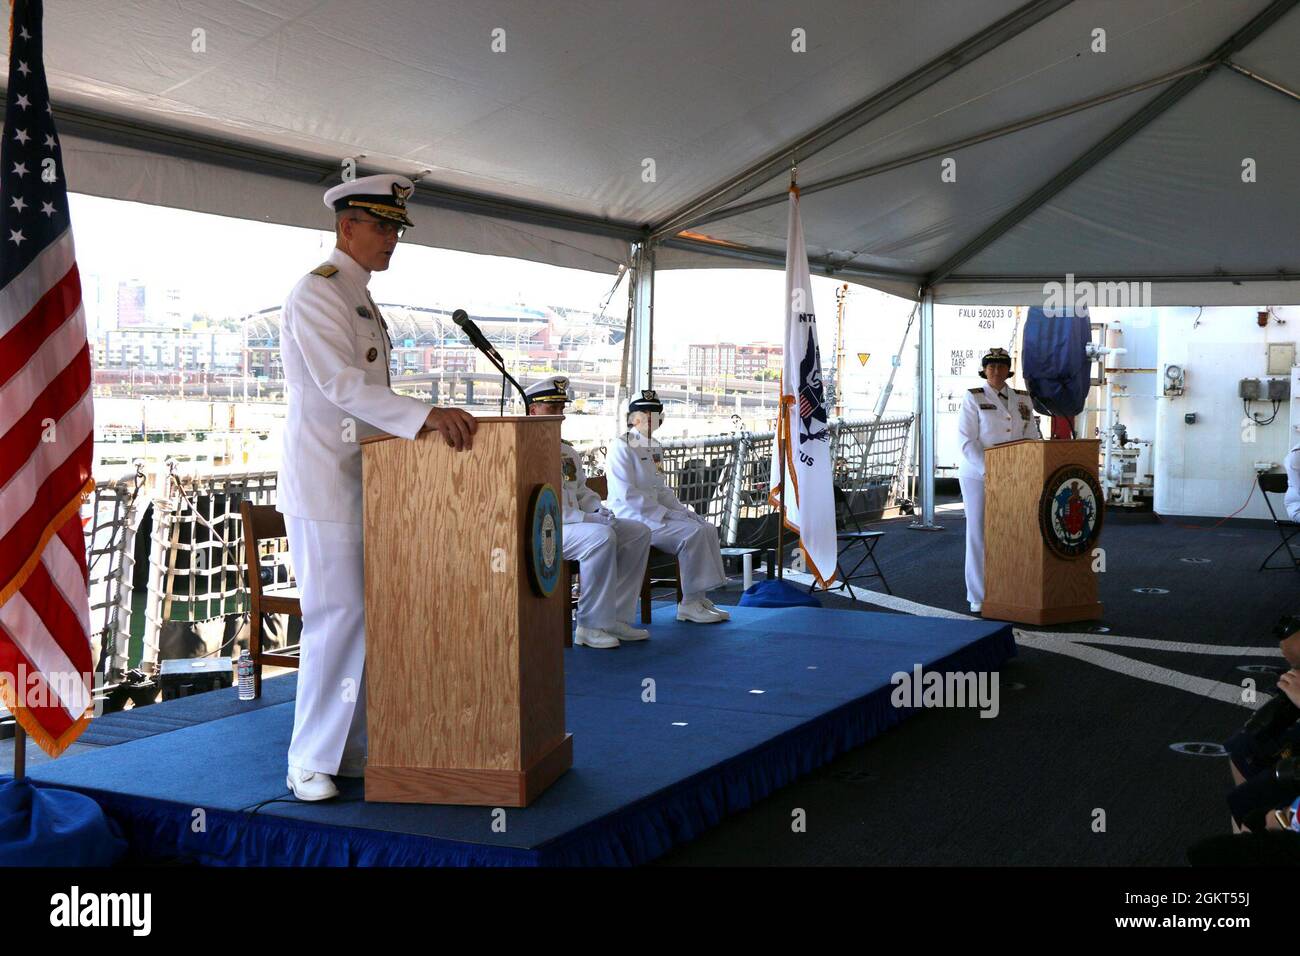 Coast Guard Rear Adm. Peter W. Gautier, acting commander, U.S. Coast Guard Pacific Area and Defense Forces West, speaks during the Coast Guard Cutter Healy (WAGB 20) change of command ceremony aboard the cutter moored at Base Seattle. Capt. Kenneth J. Boda relieved Capt. Mary Ellen J. Durley as Healy’s commanding officer during the ceremony. Stock Photo